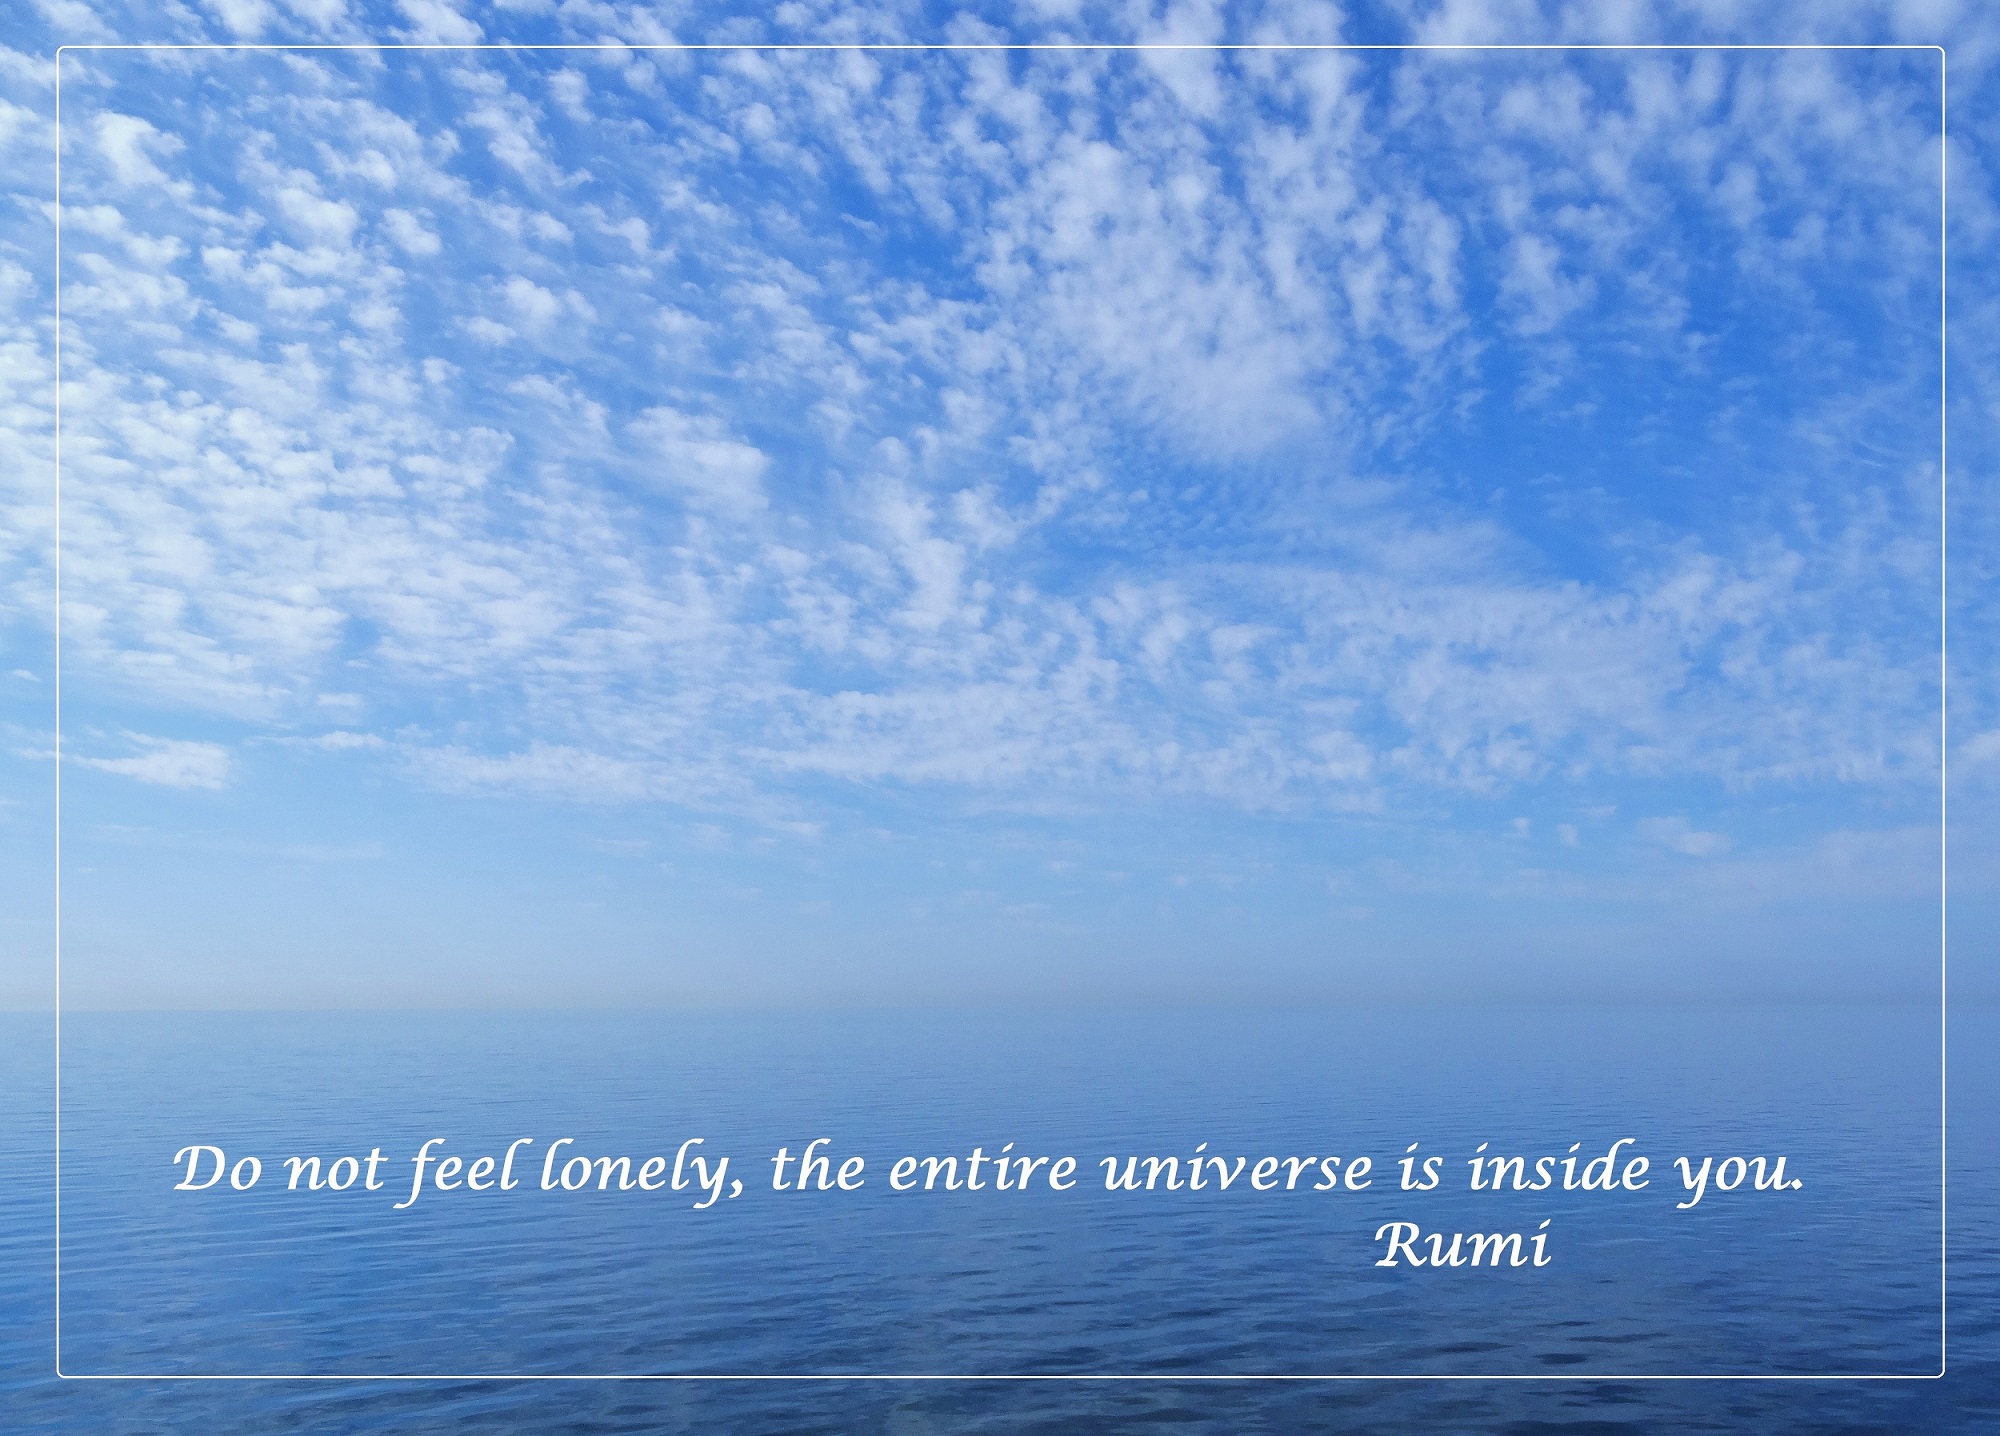 Do not feel lonly, the entire universe is inside you. Rumi.